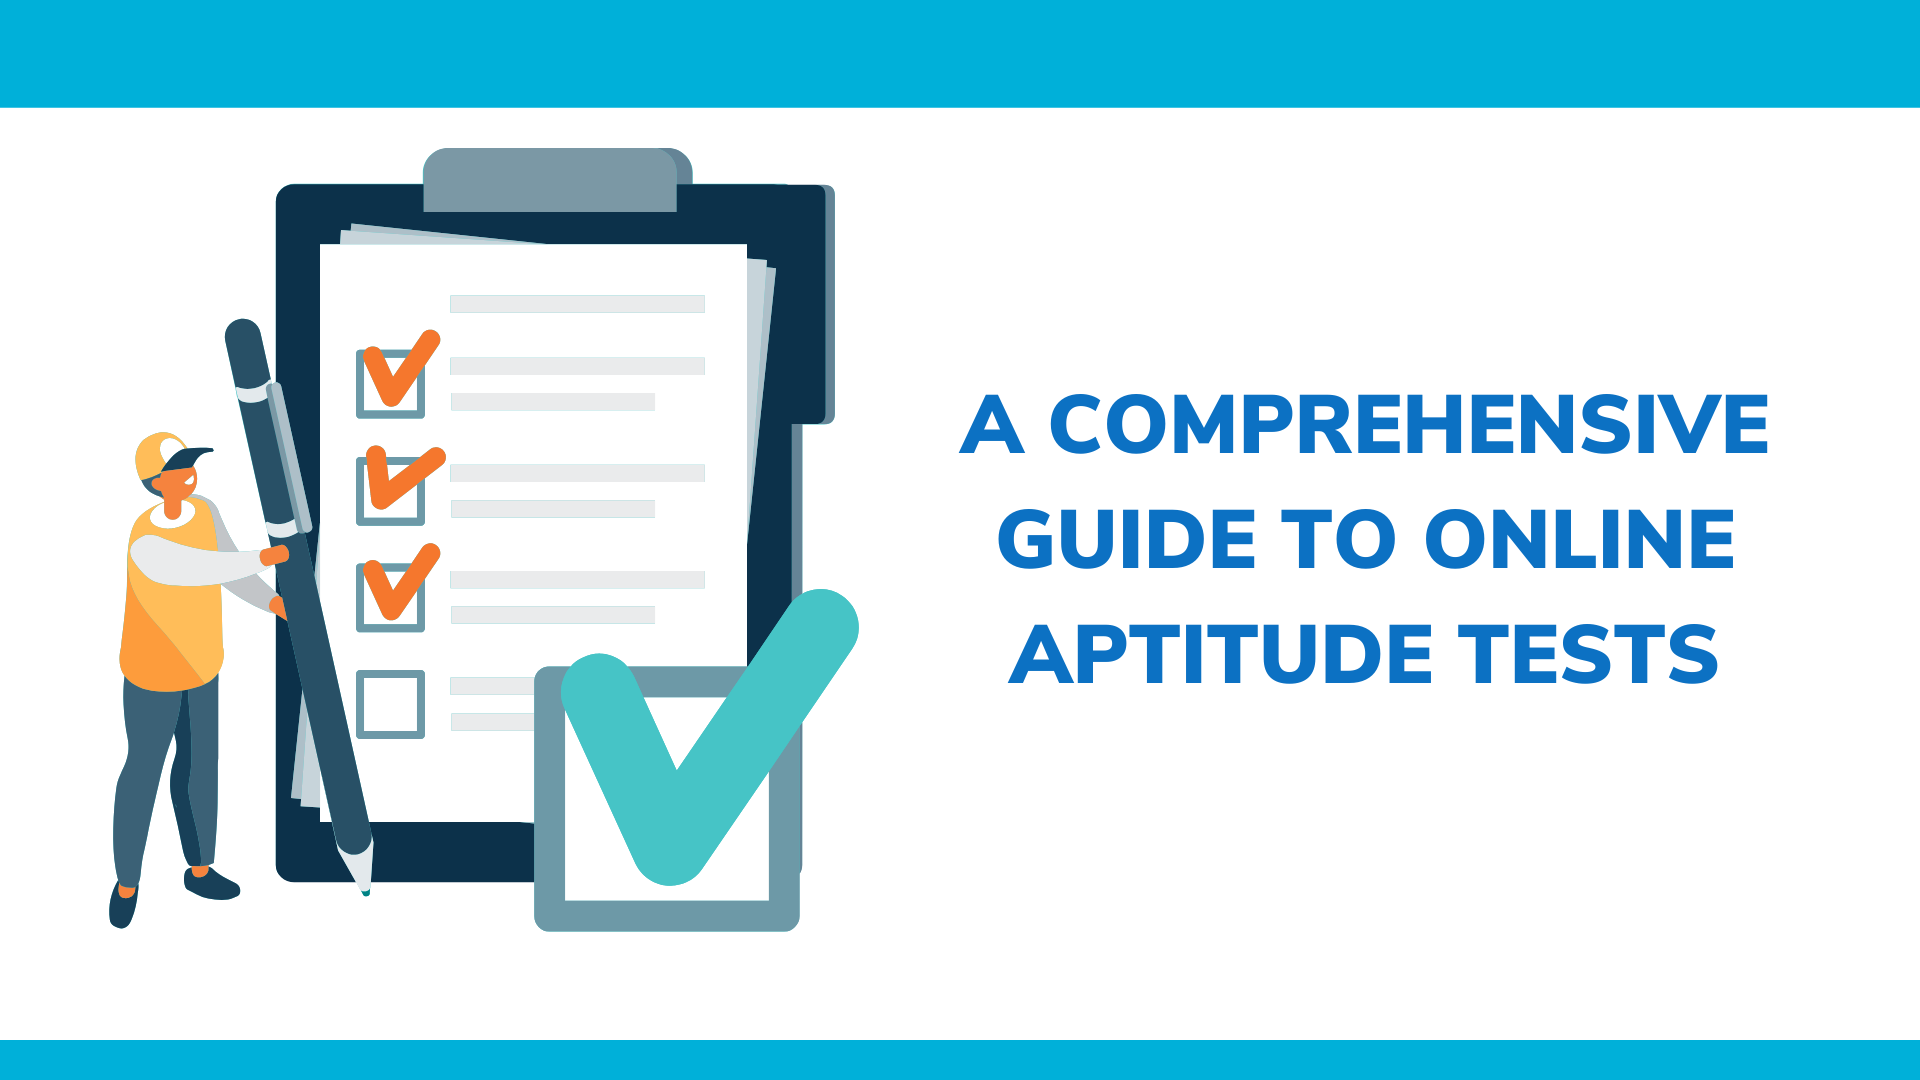 A Comprehensive Guide to Online Aptitude Tests